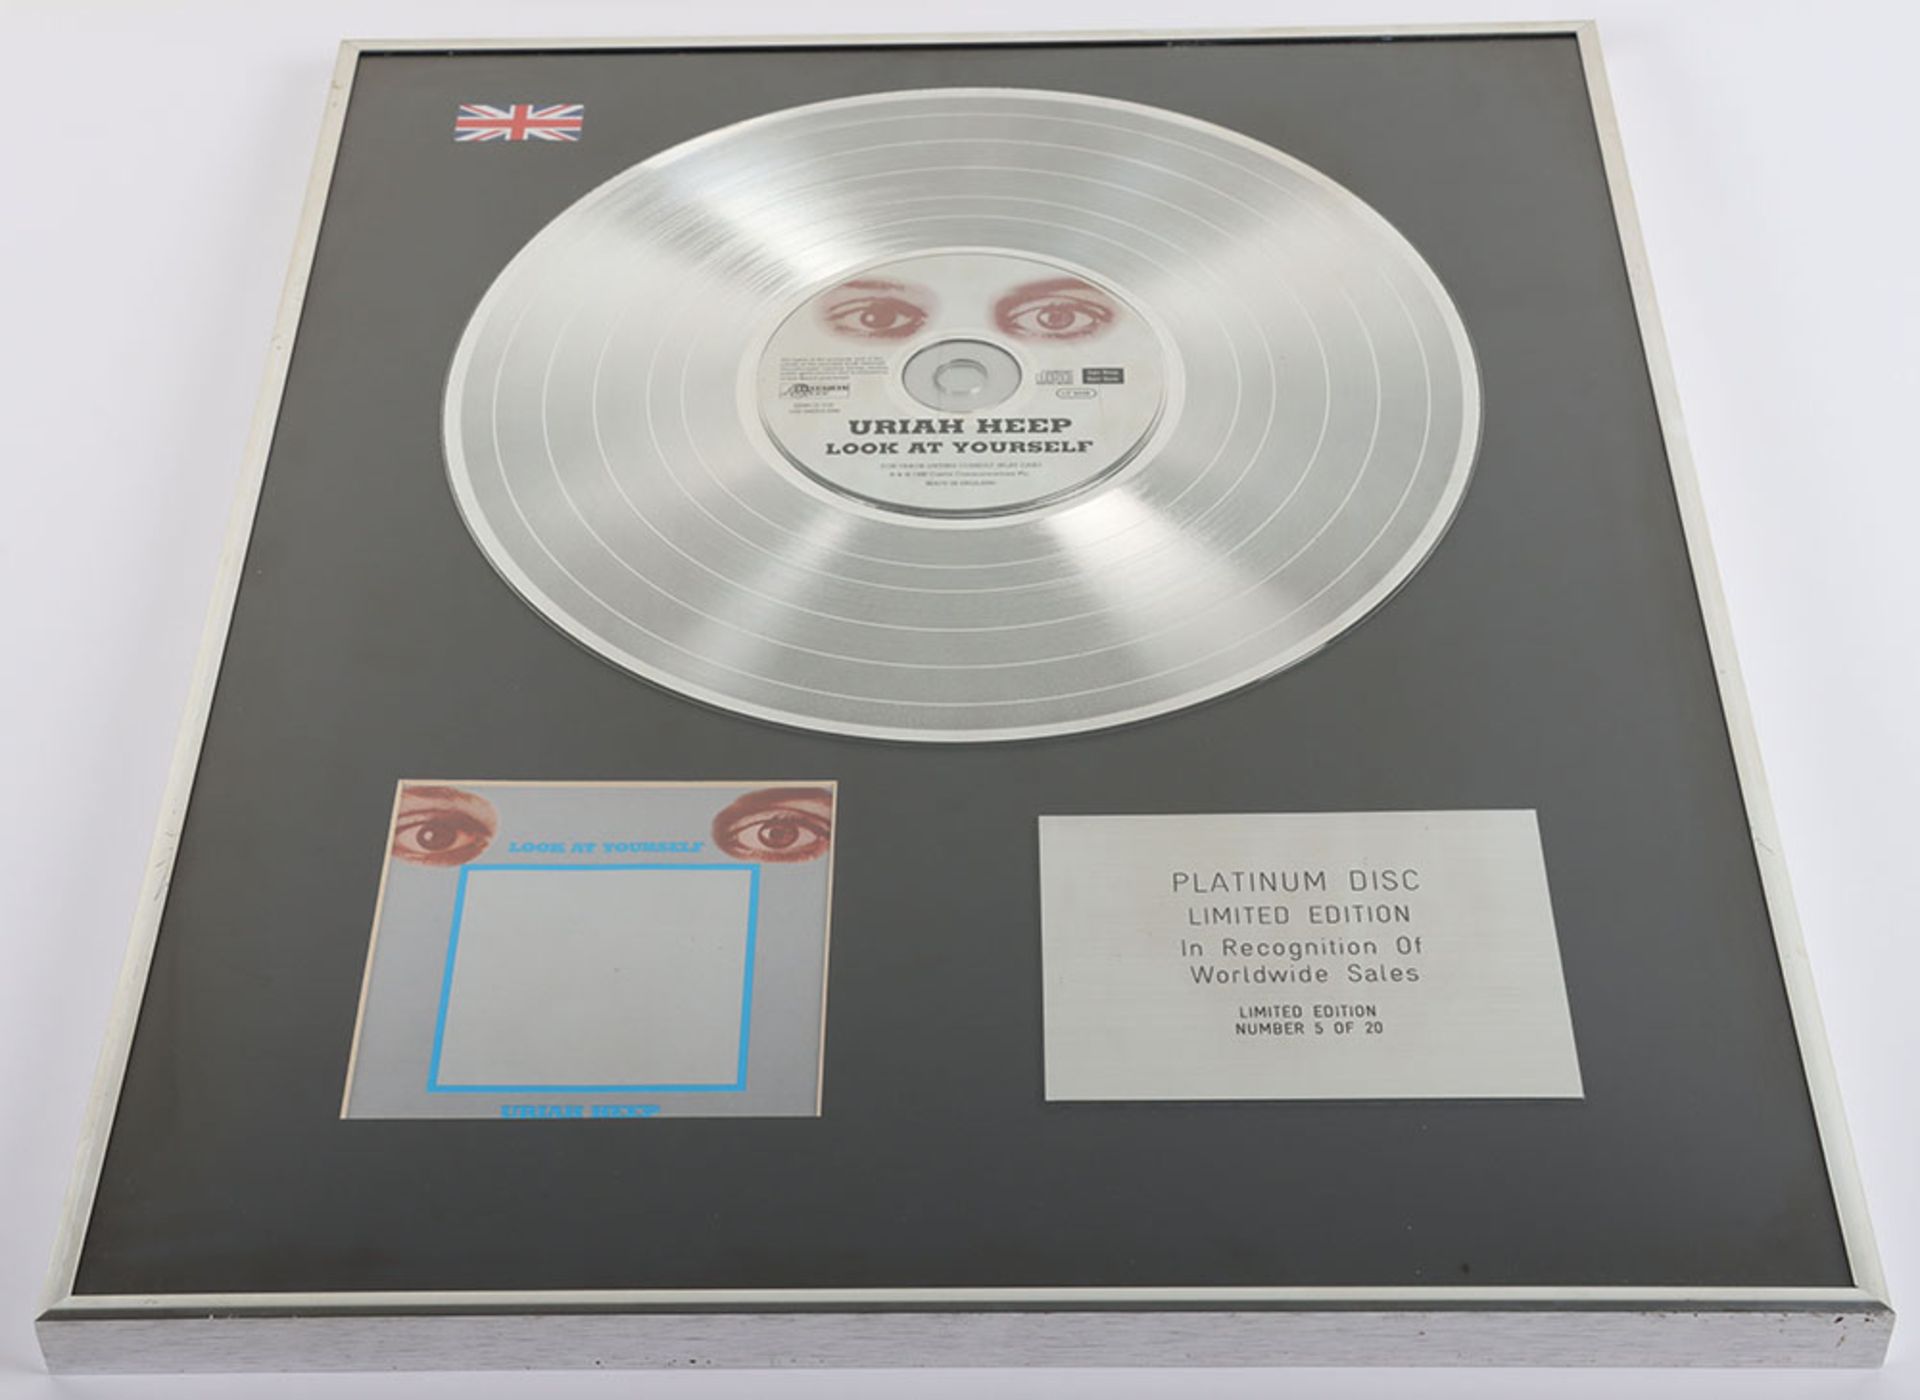 Uriah Heep Platinum Disc Look At Yourself Limited Edition In Recognition of Worldwide Sales - Image 7 of 9